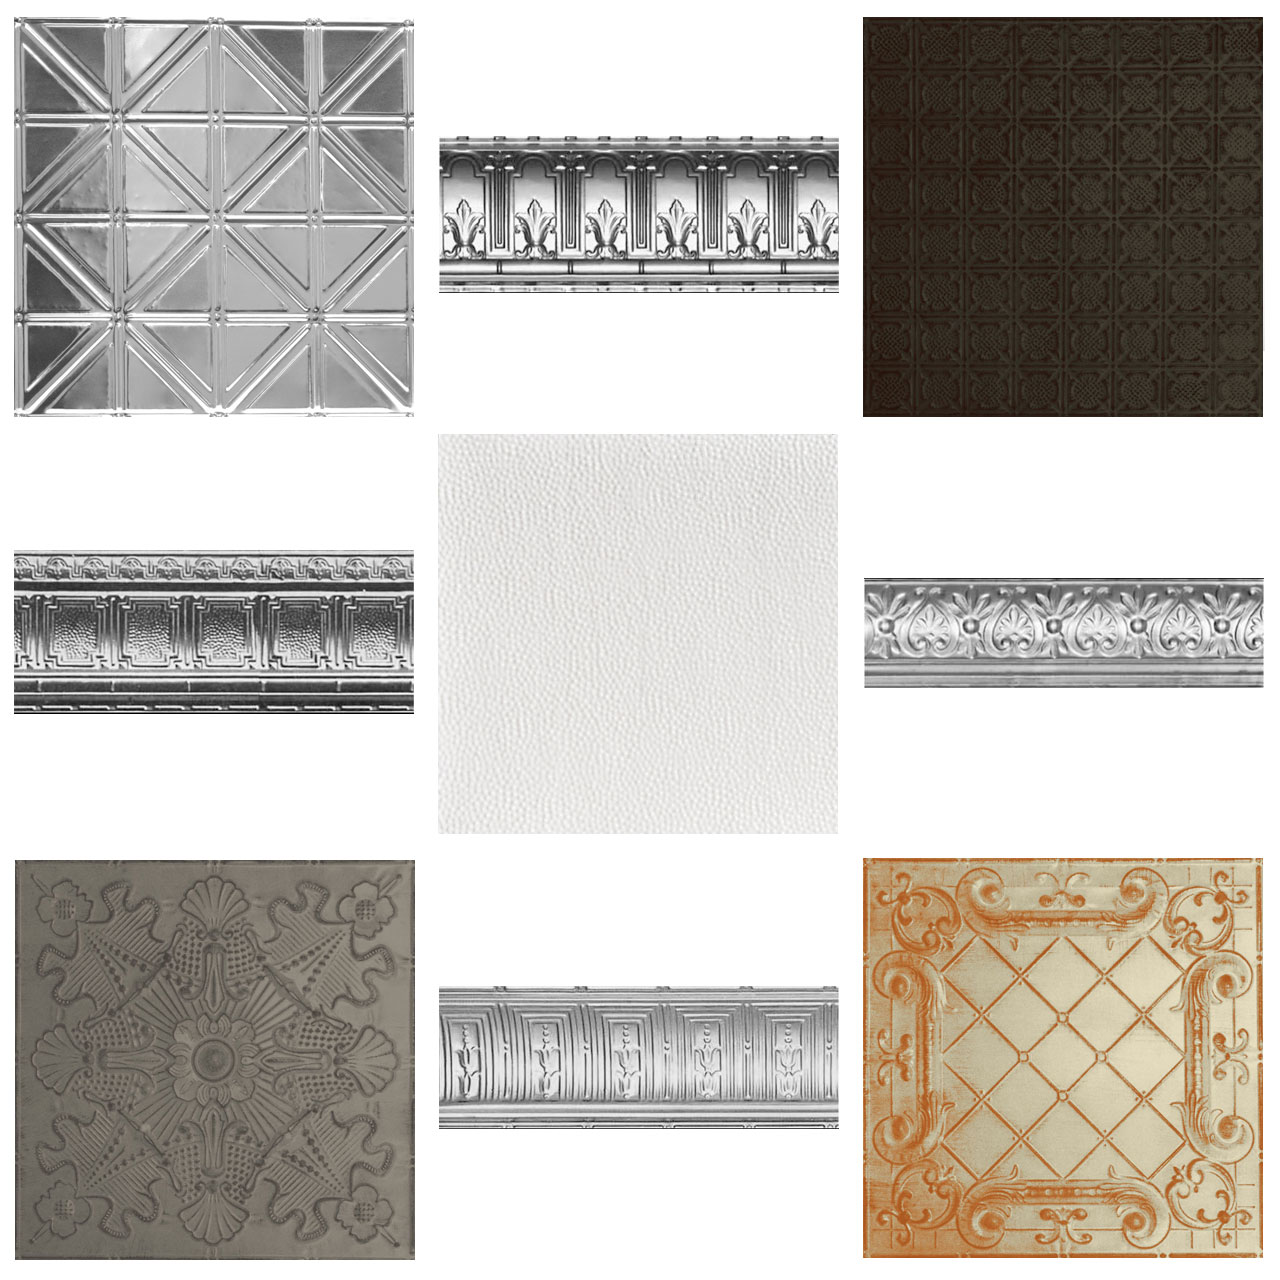 Shanko Tin Ceiling Tile And Cornices Sample Pack